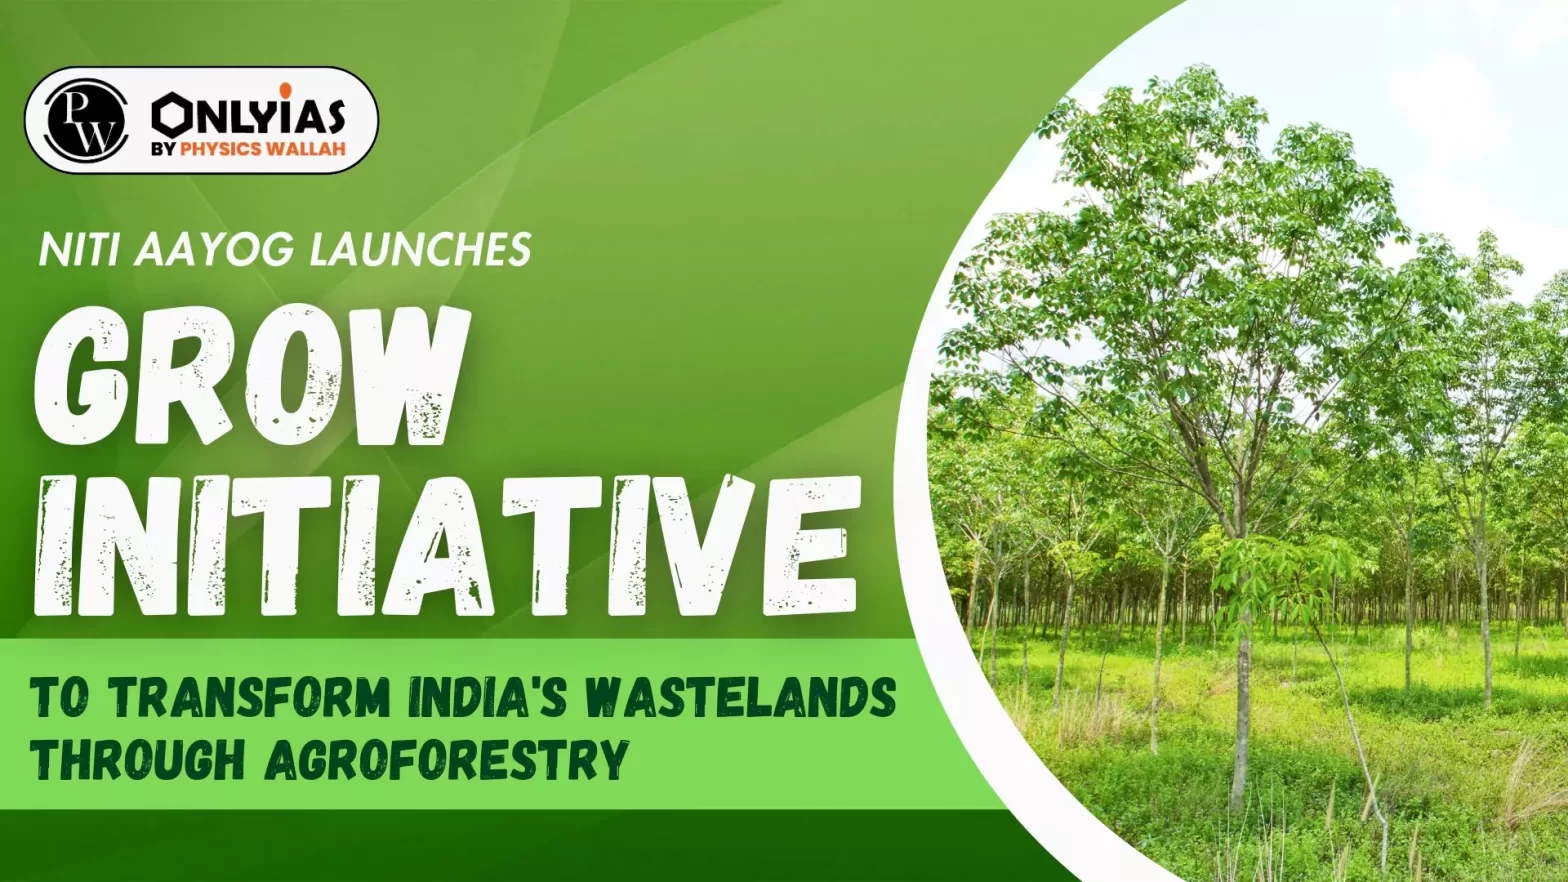 NITI Aayog Launches GROW Initiative to Transform India’s Wastelands Through Agroforestry